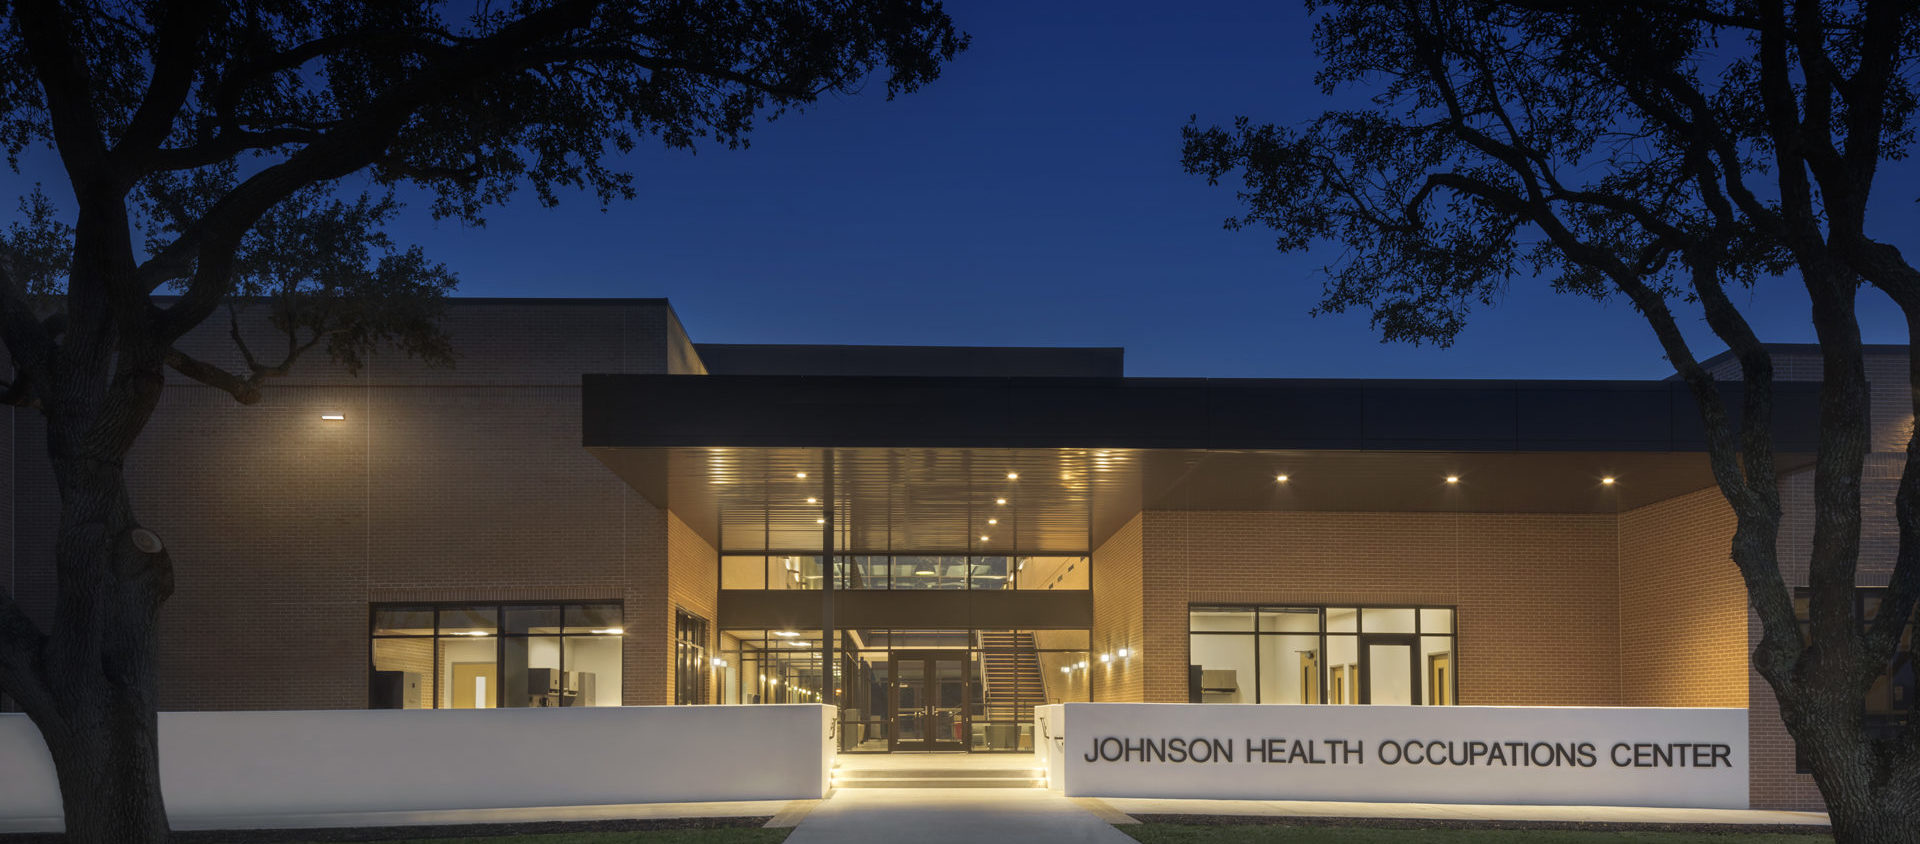 Wharton County Junior College Expands Health Occupations Center